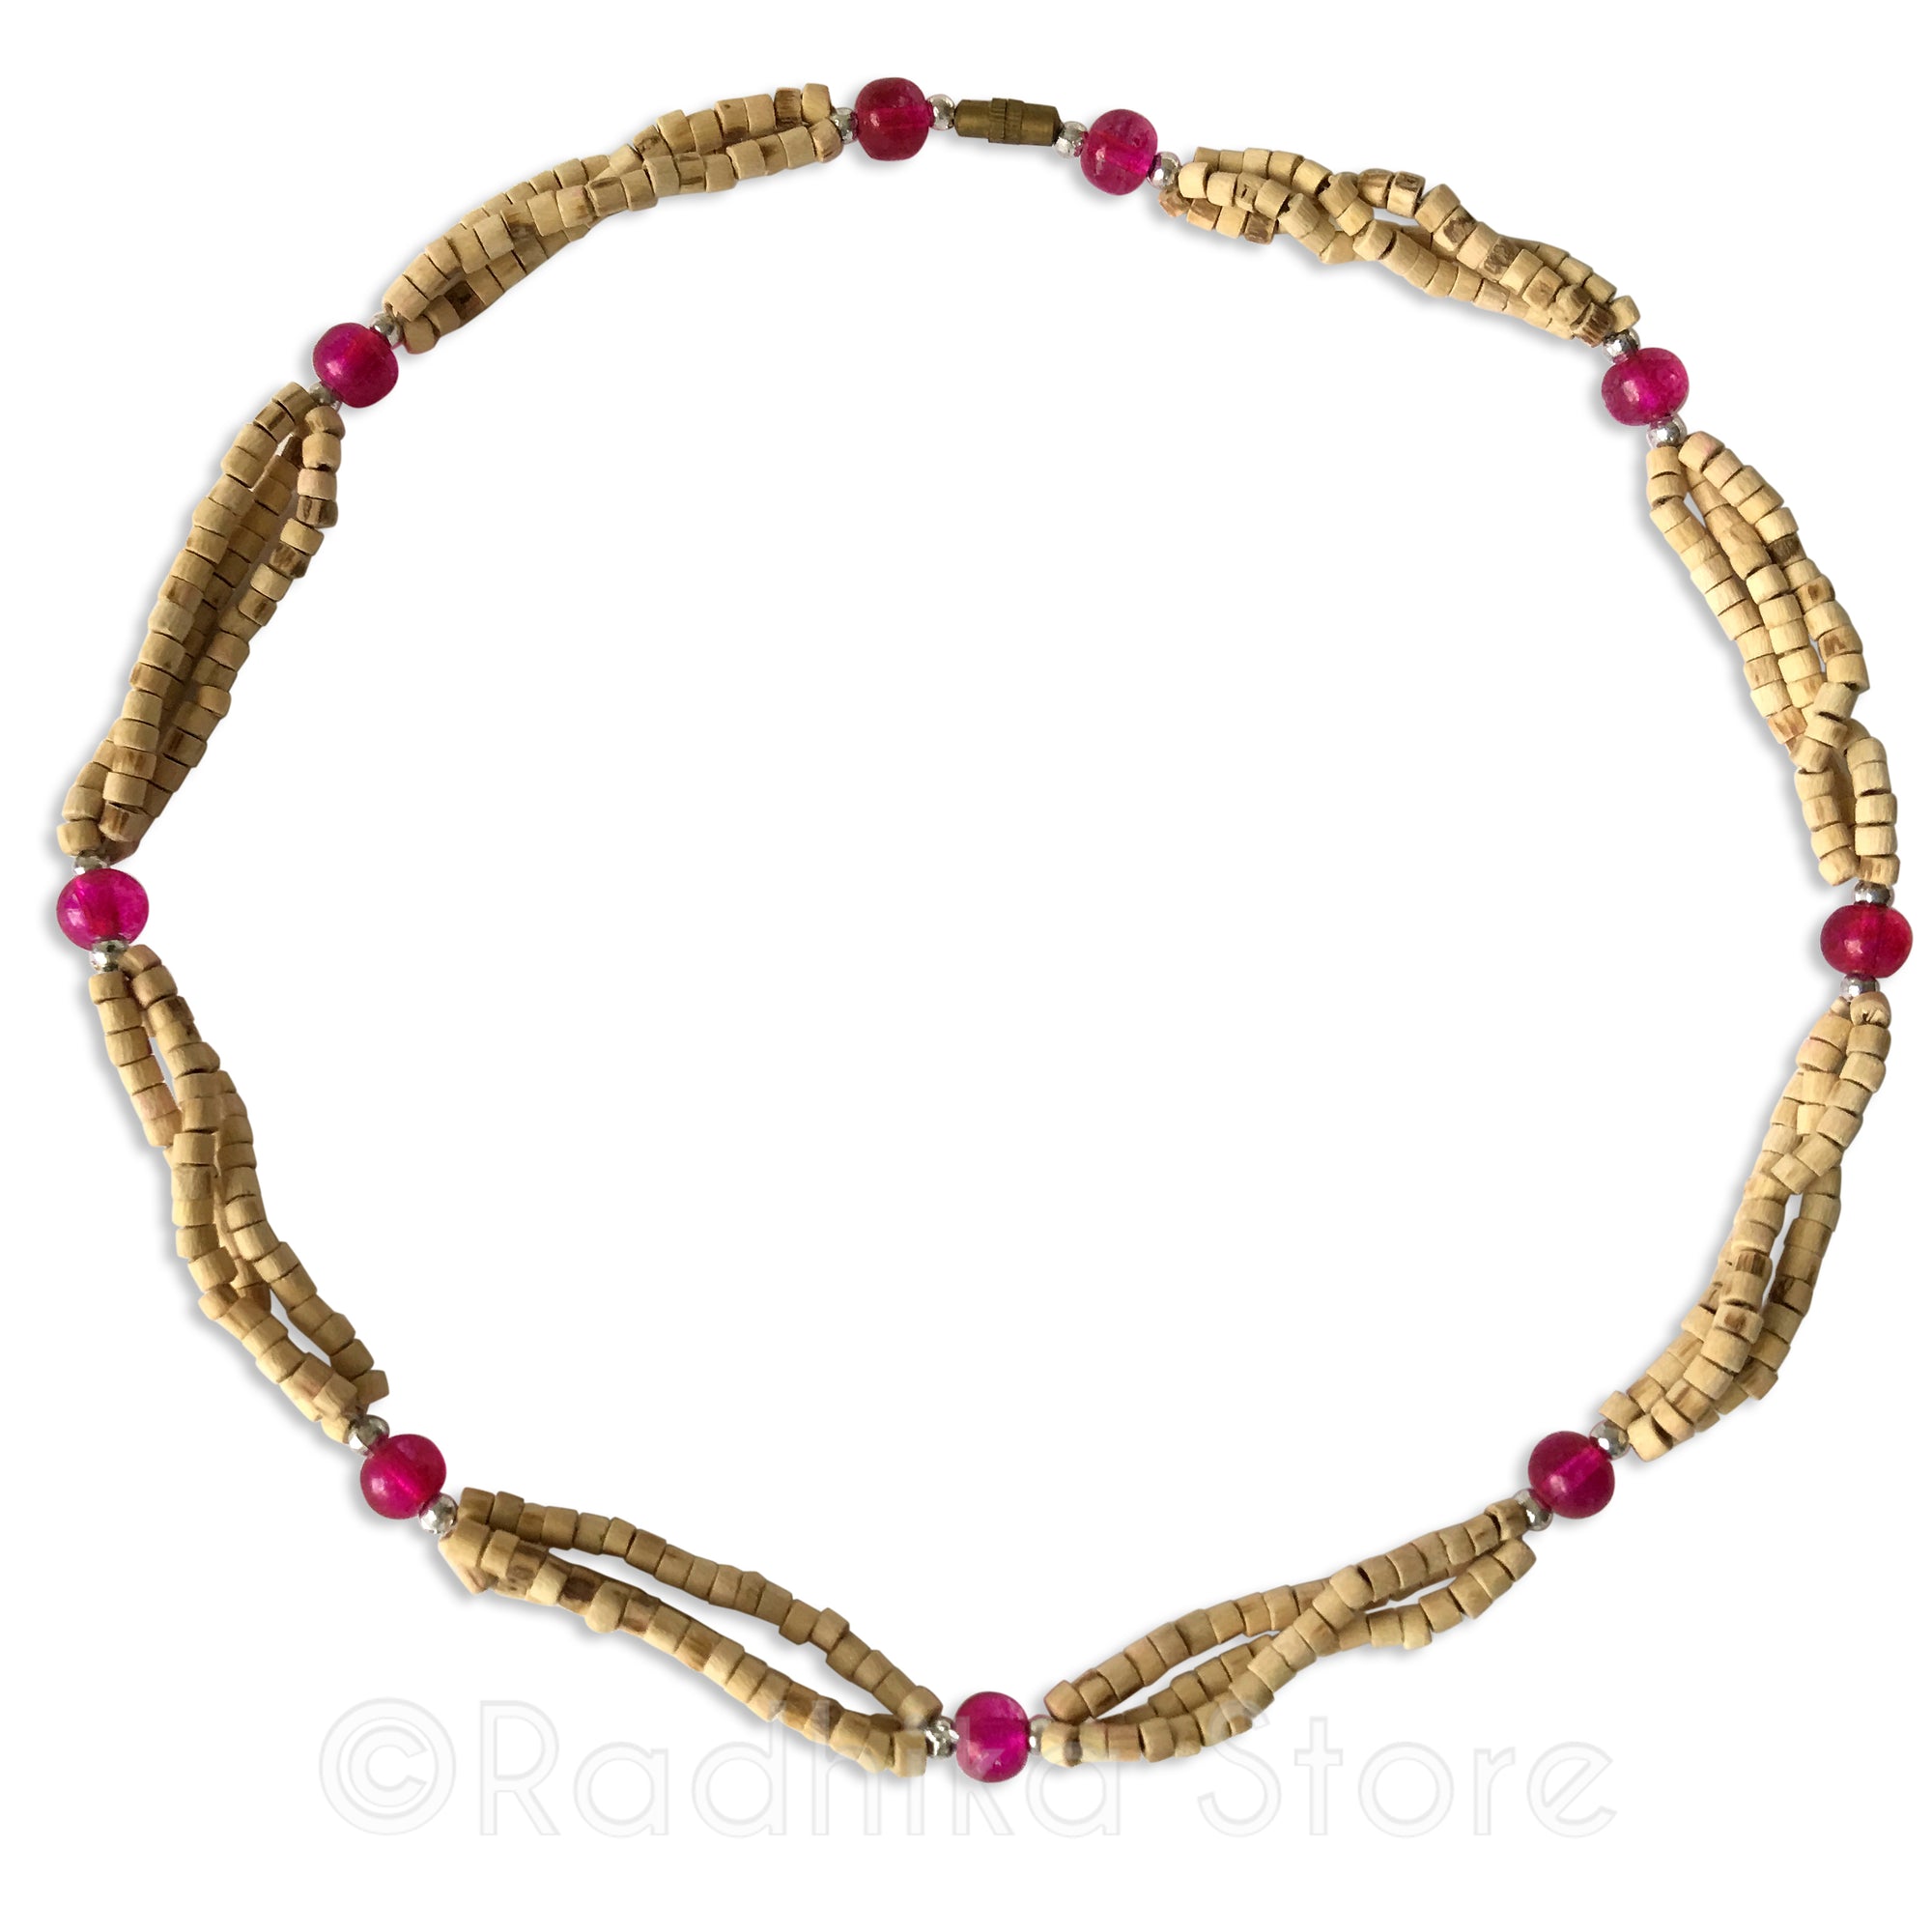 Triple Strand Natural Cut Tulsi Neck Beads -With Pink Glass Bead